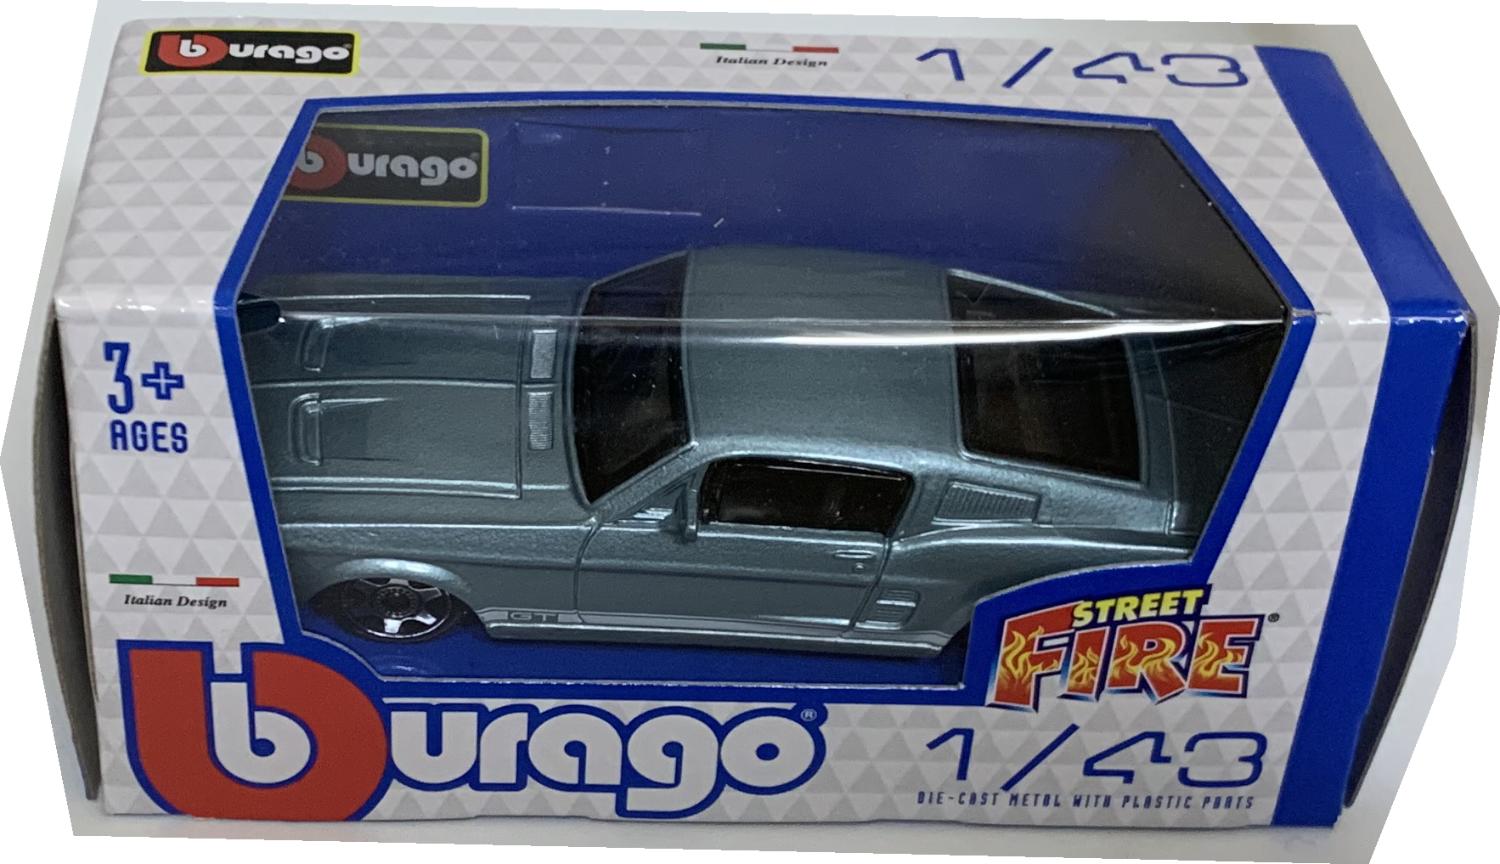 Ford Mustang GT 1964 in metallic blue 1:43 scale model from Bburago, streetfire